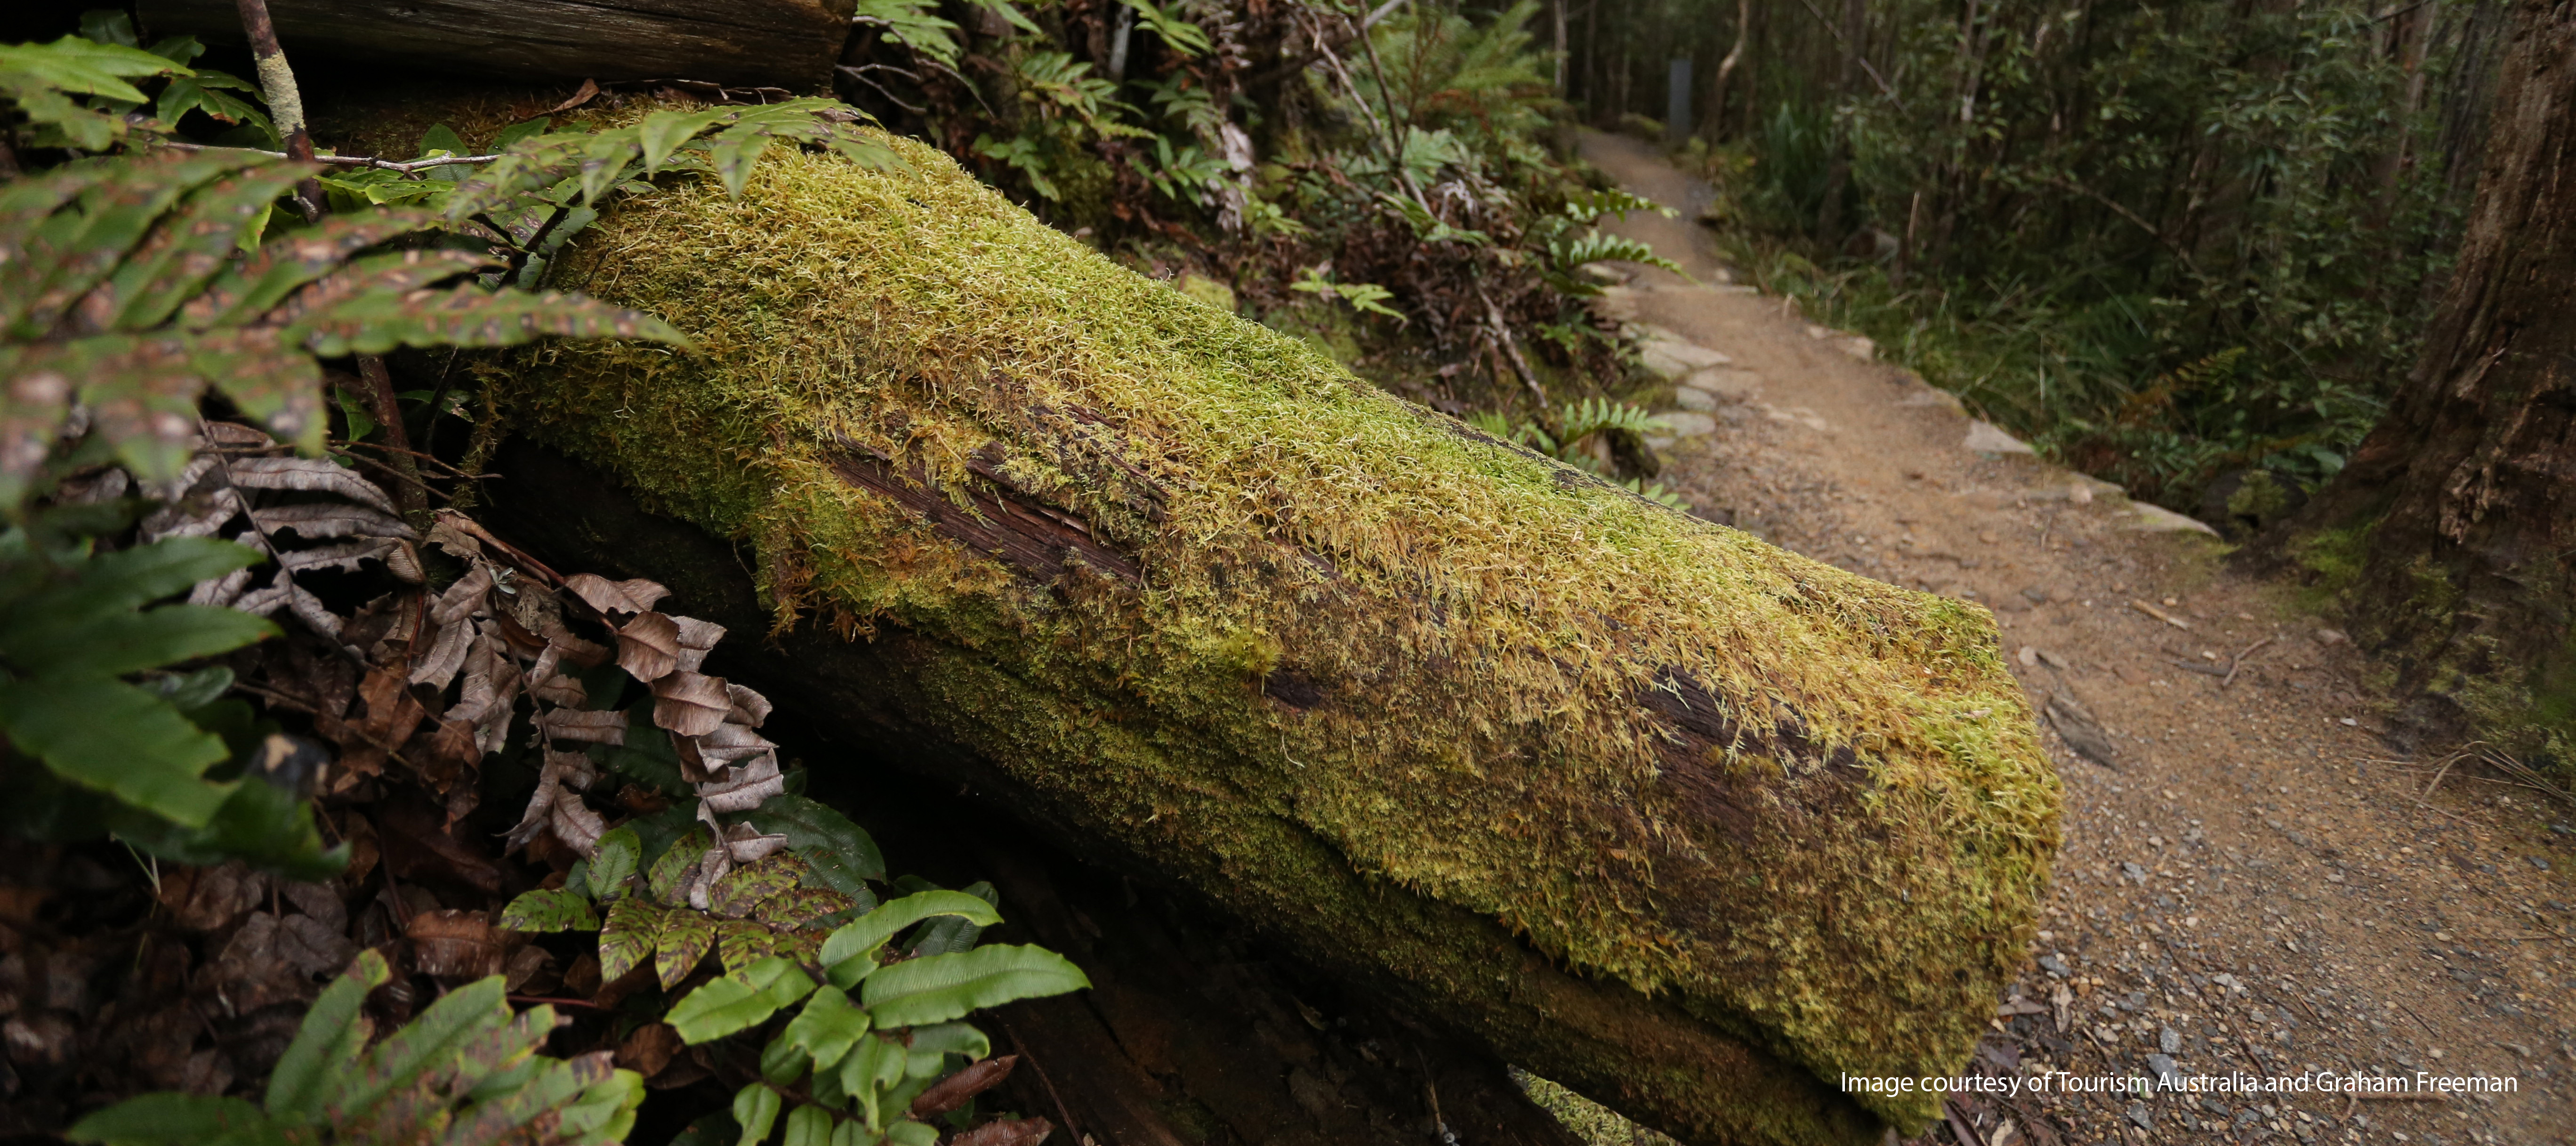 Image of North South track on kunanyi with mossy ferns and green foliage.